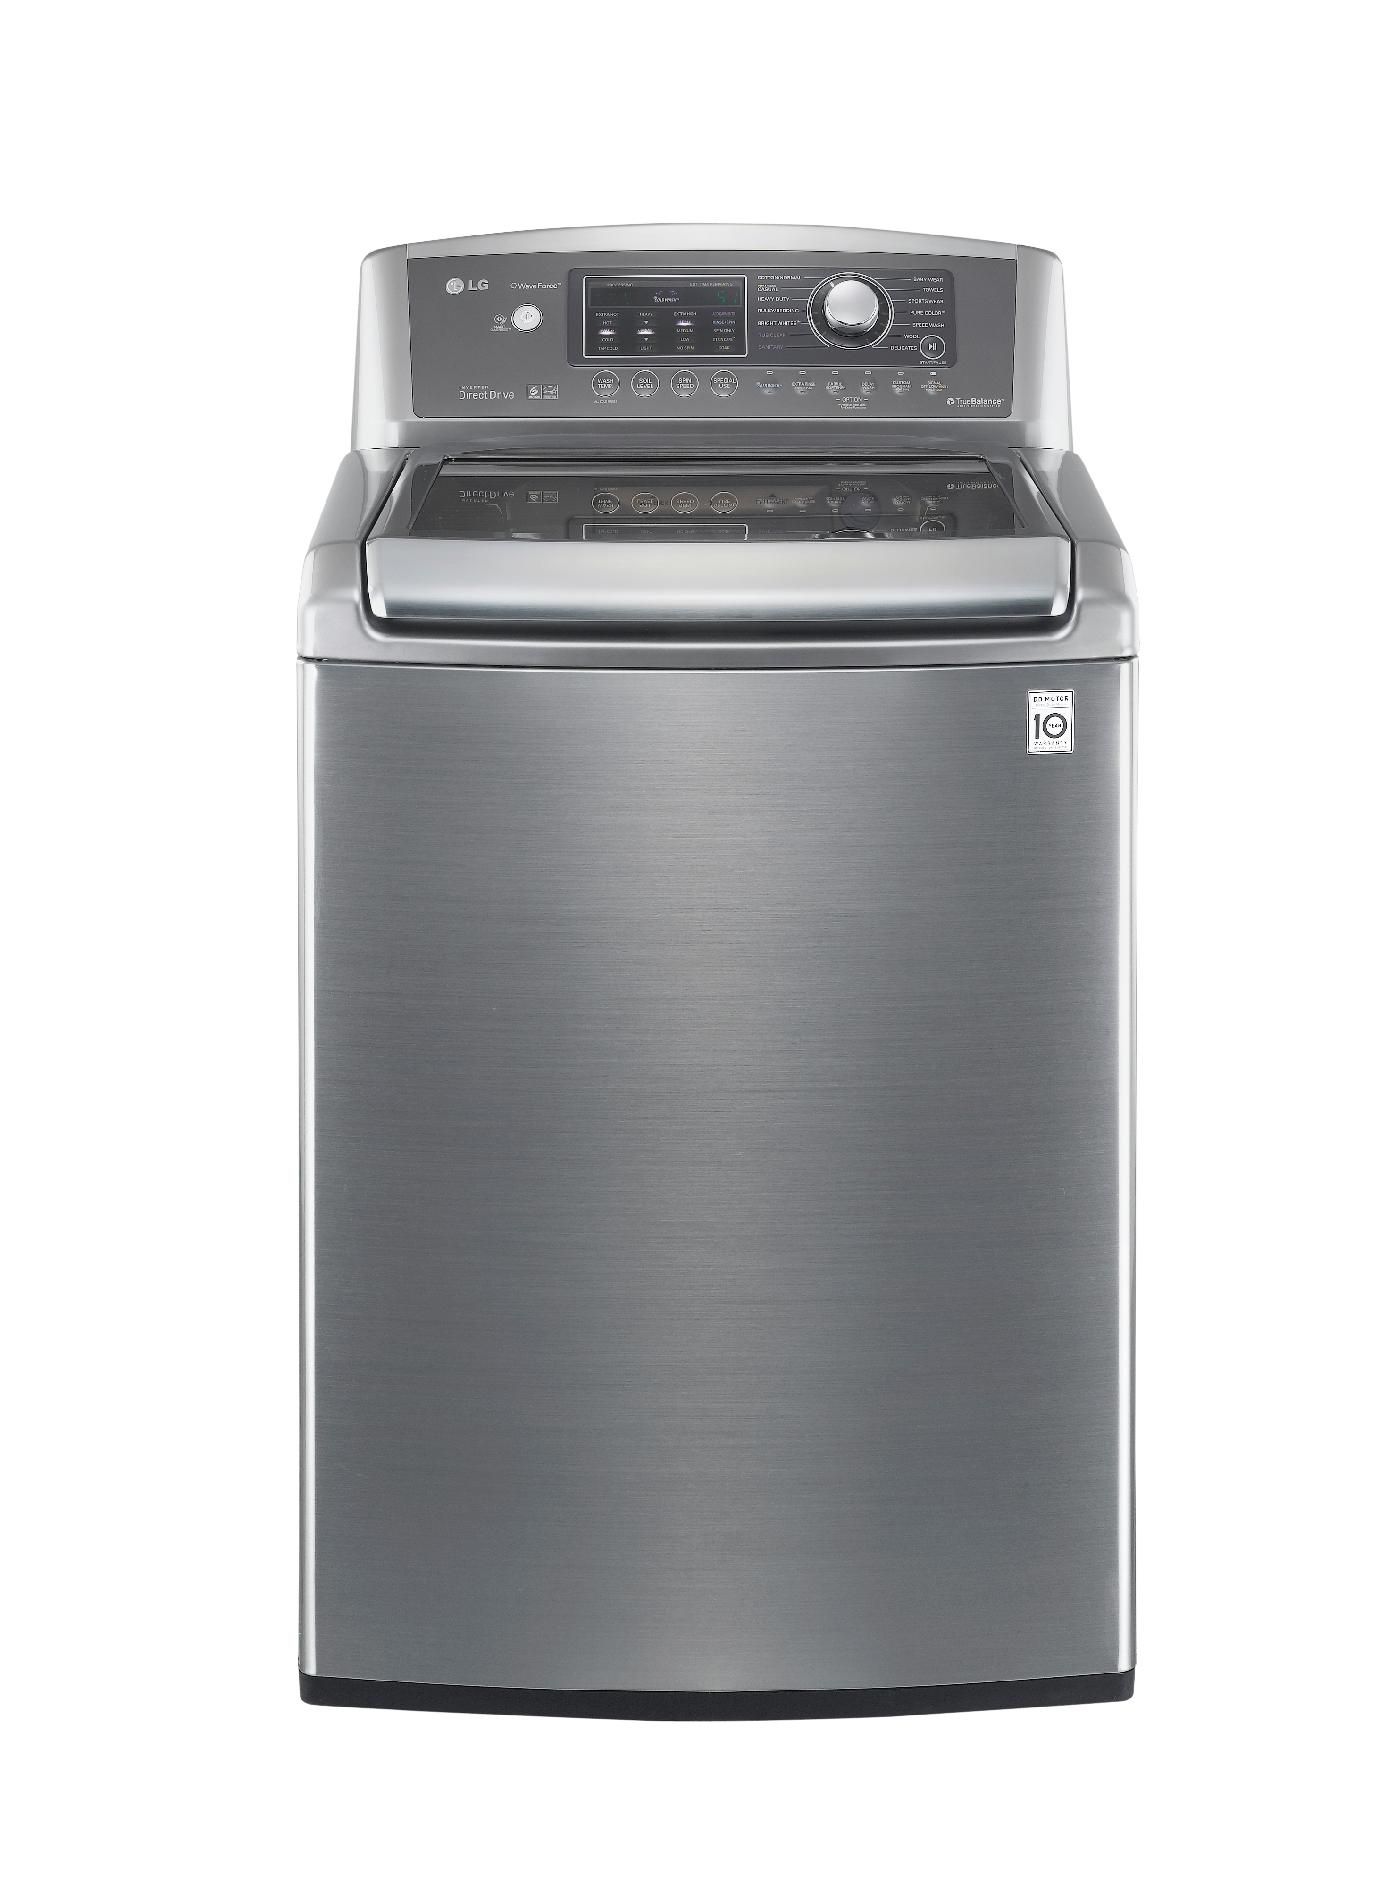 LG 4.7 cu. ft. Ultra Large Capacity High-Efficiency Top Load Washer w/ WaveForce - Graphite Steel